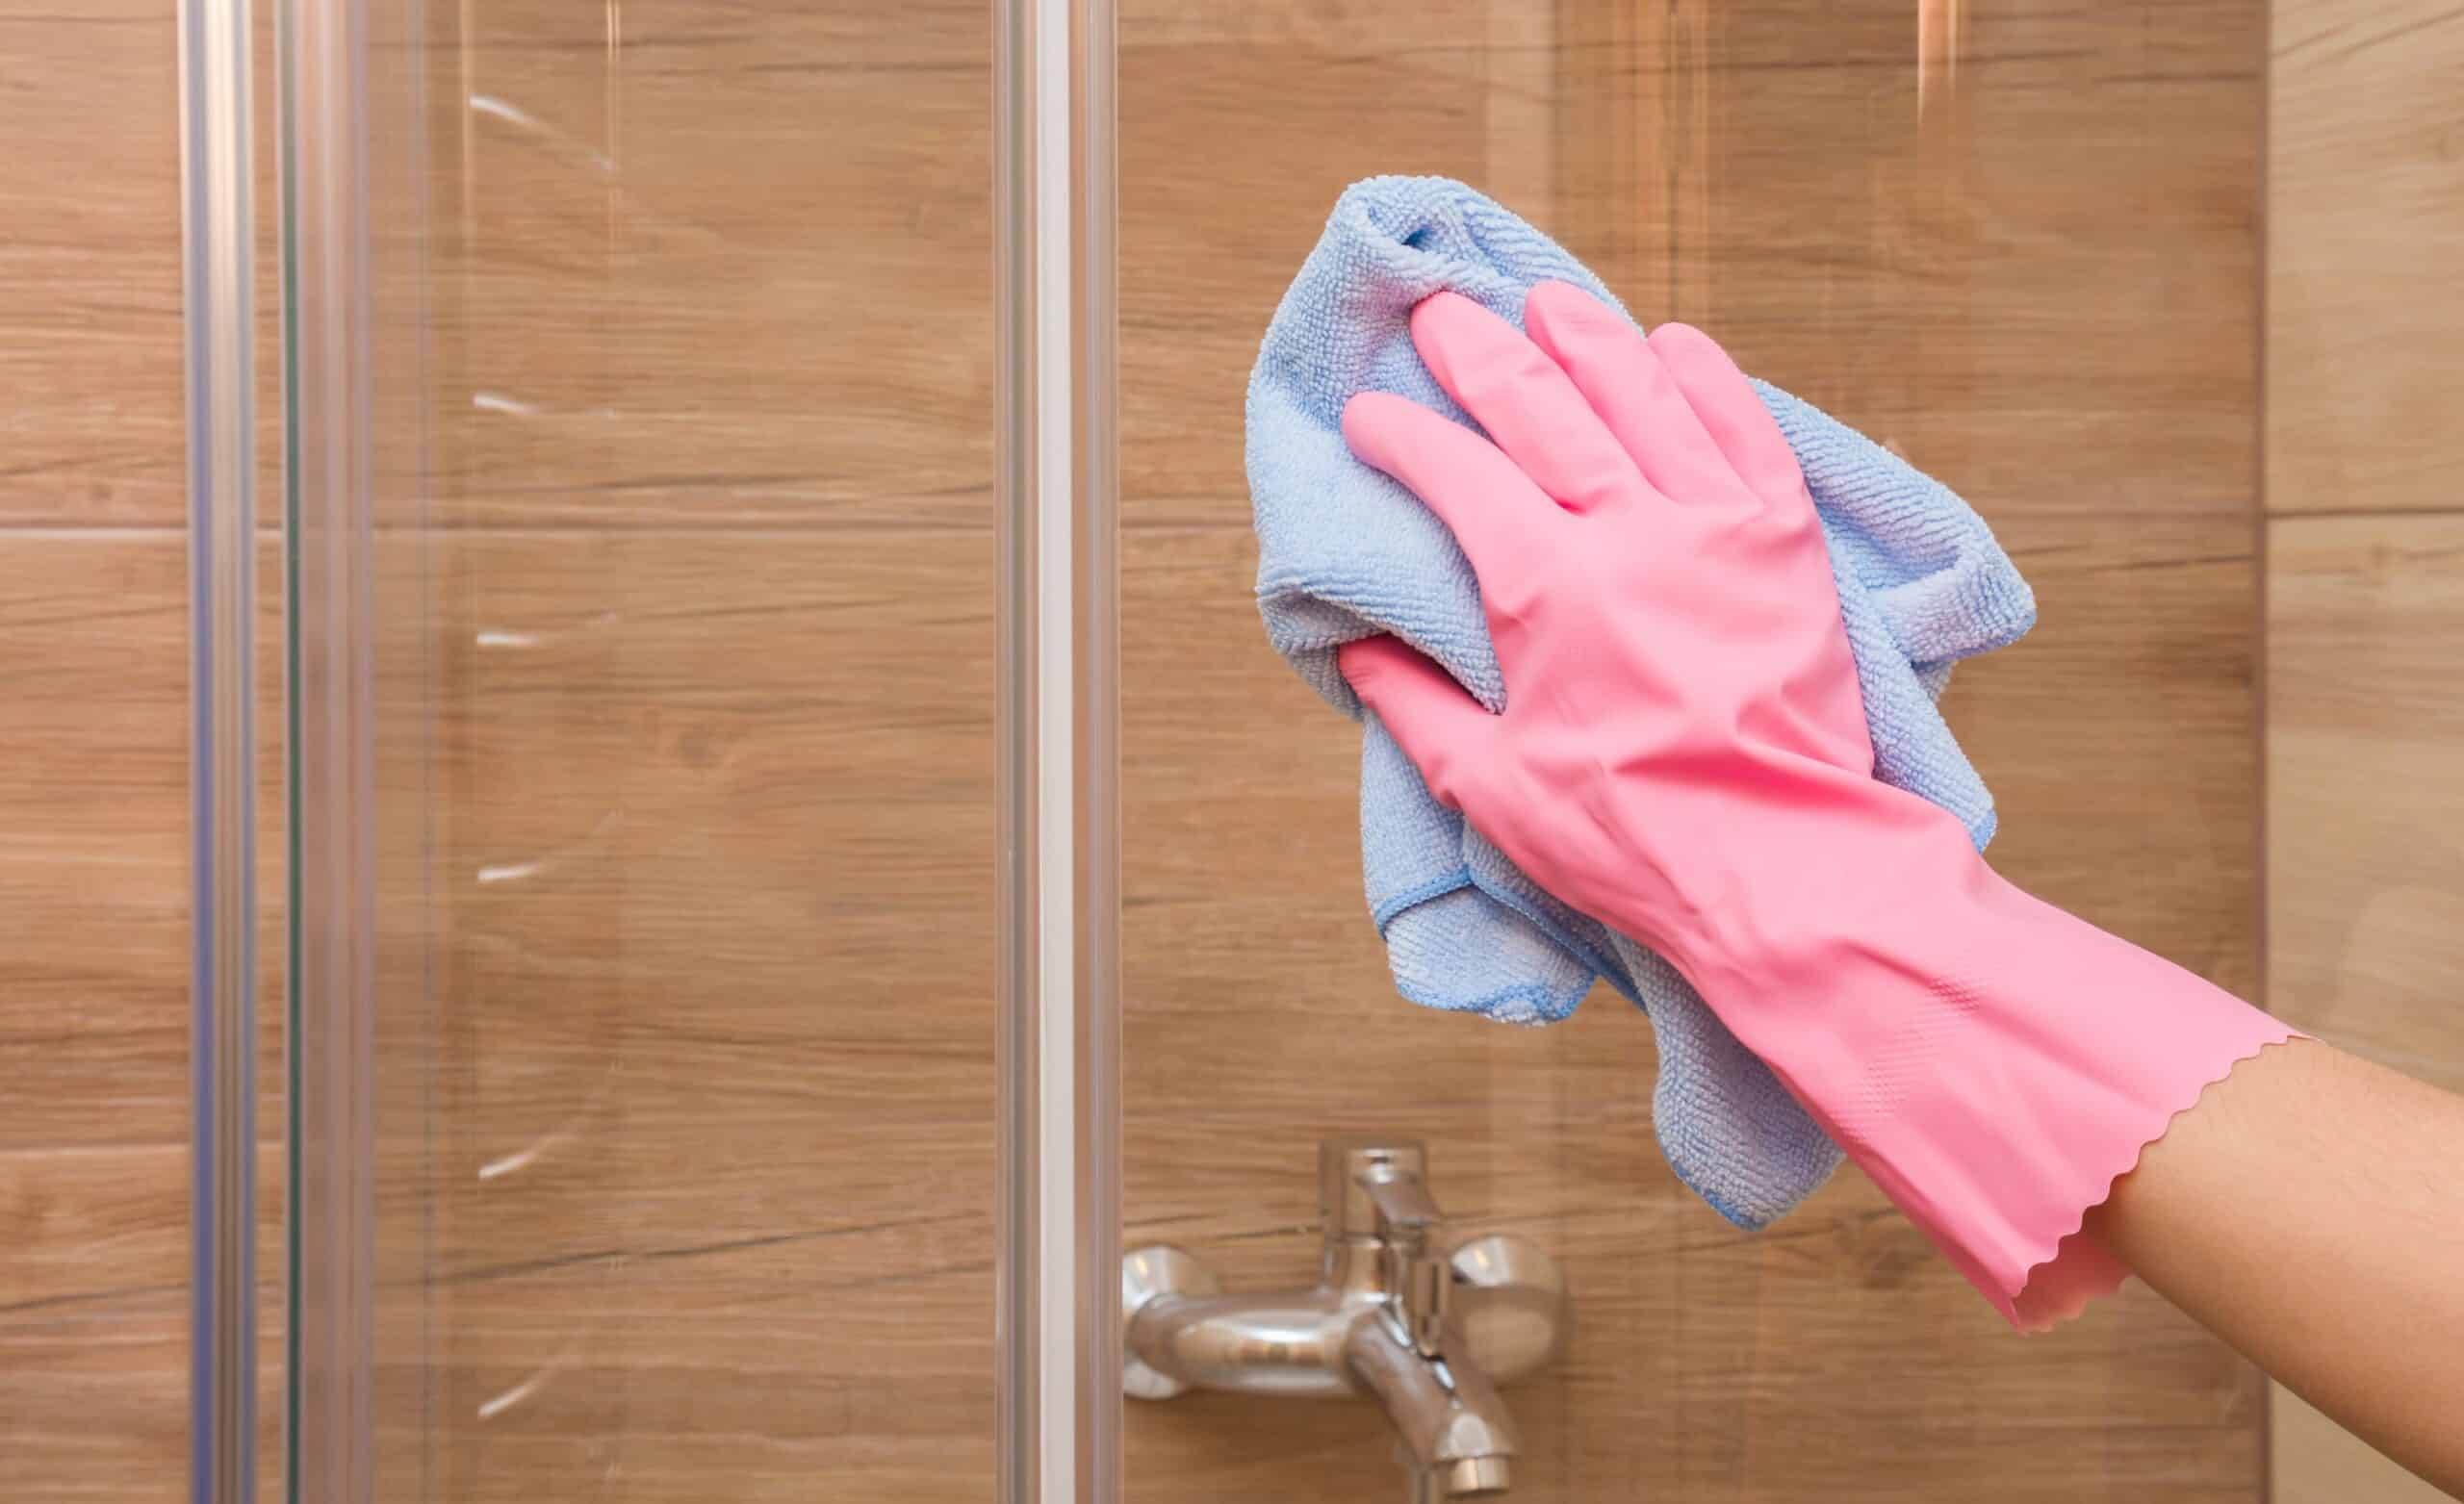 How To Remove Soap Scum From Glass Shower Doors